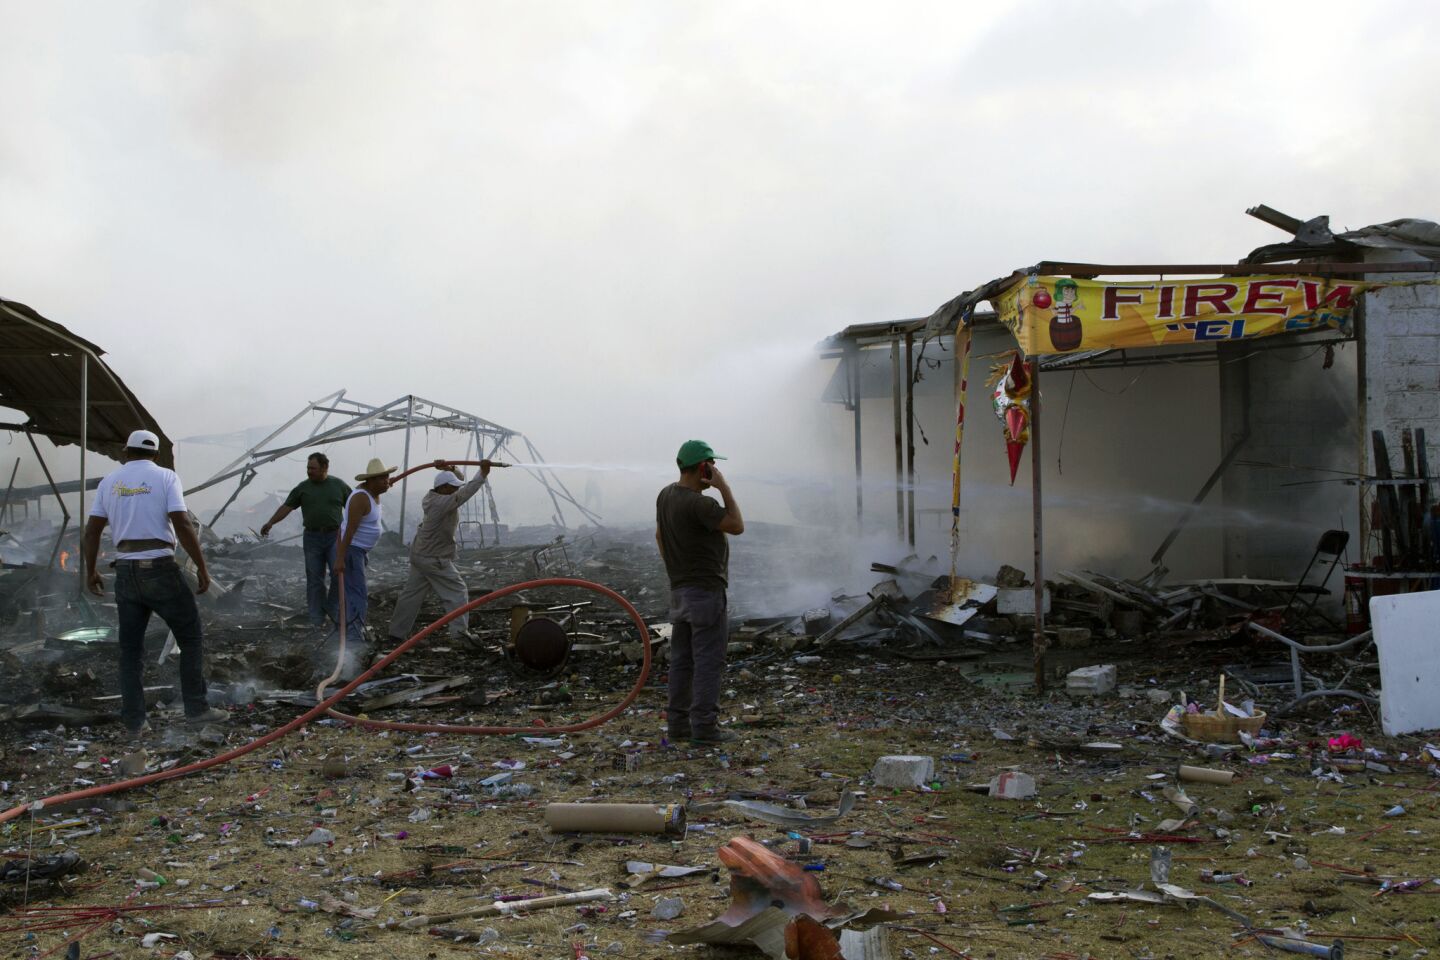 Firefighters and volunteers work at the site of a series of explosions at at fireworks market north of Mexico City.